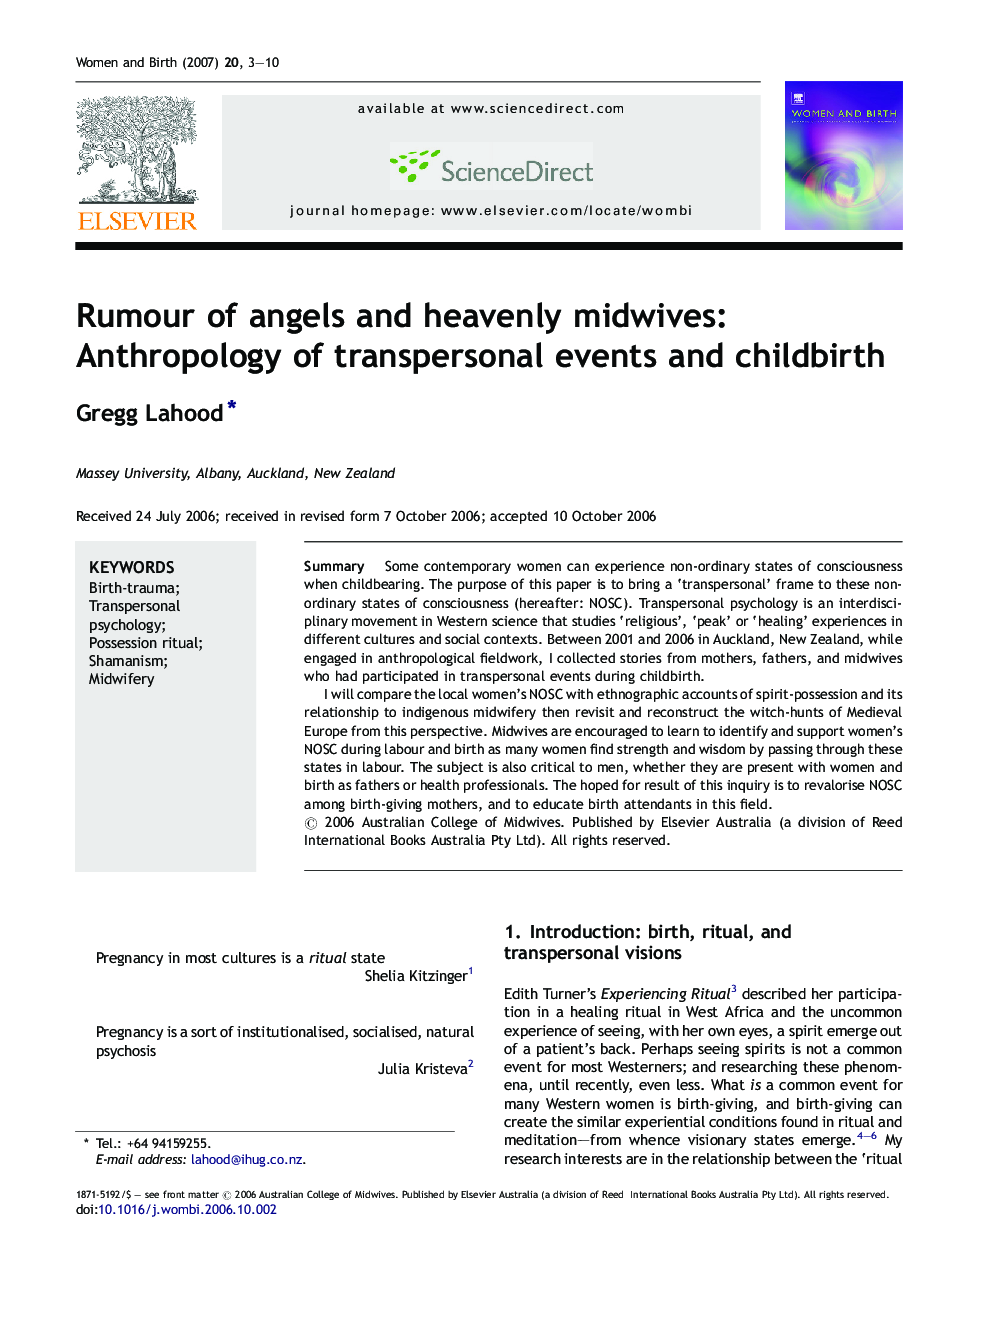 Rumour of angels and heavenly midwives: Anthropology of transpersonal events and childbirth